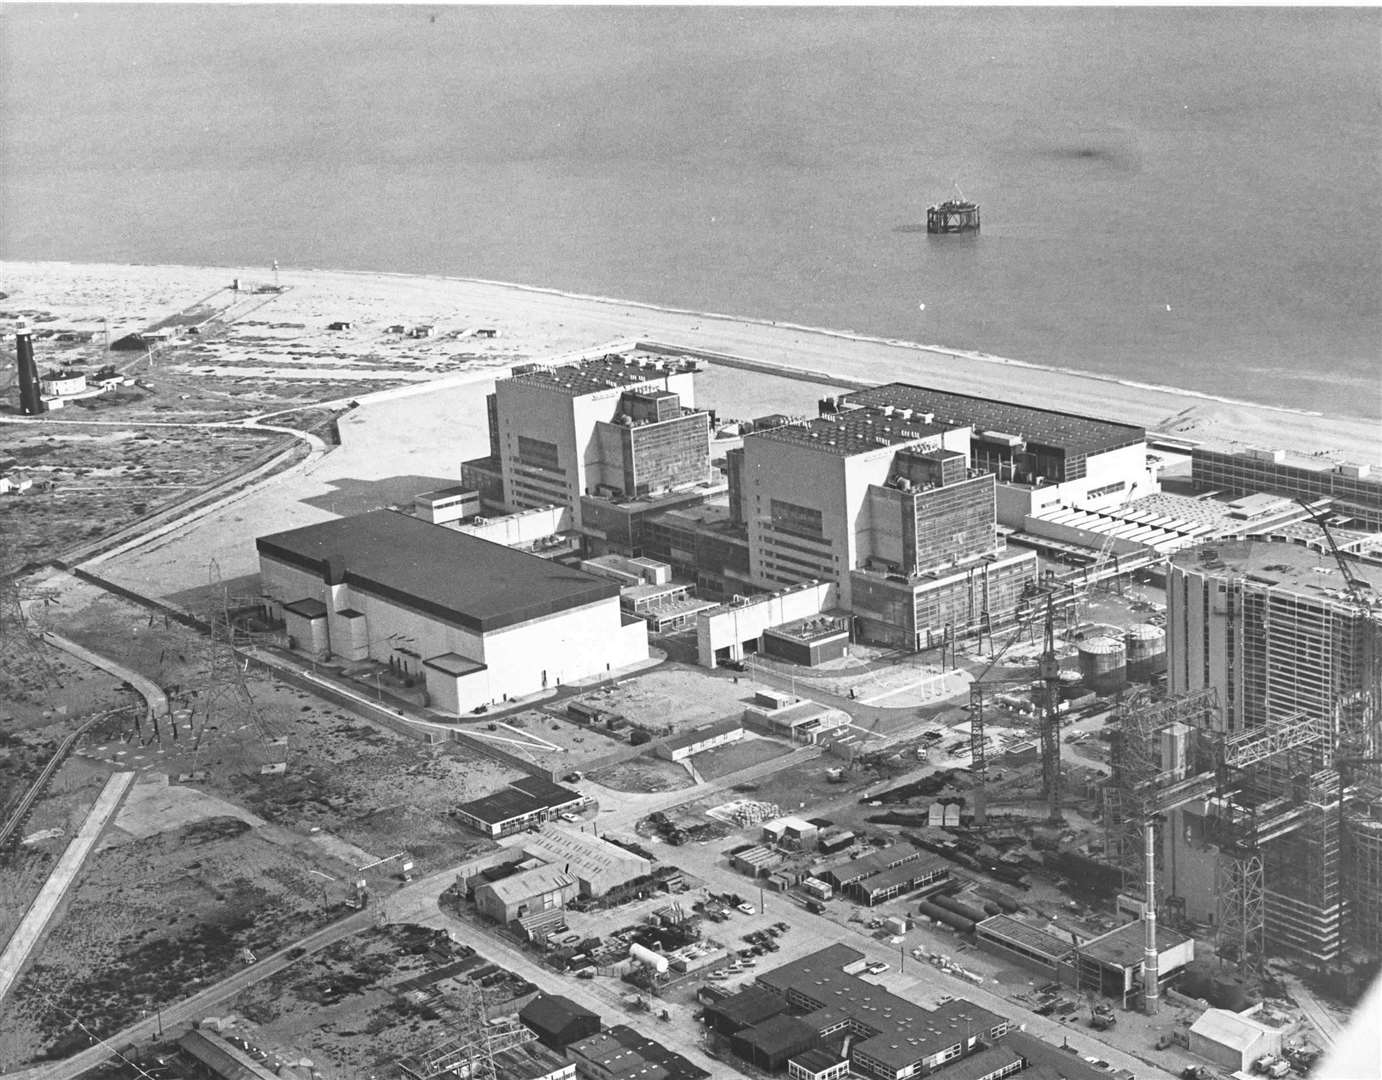 On the right of this 1967 photo, Dungeness B can be seen under construction